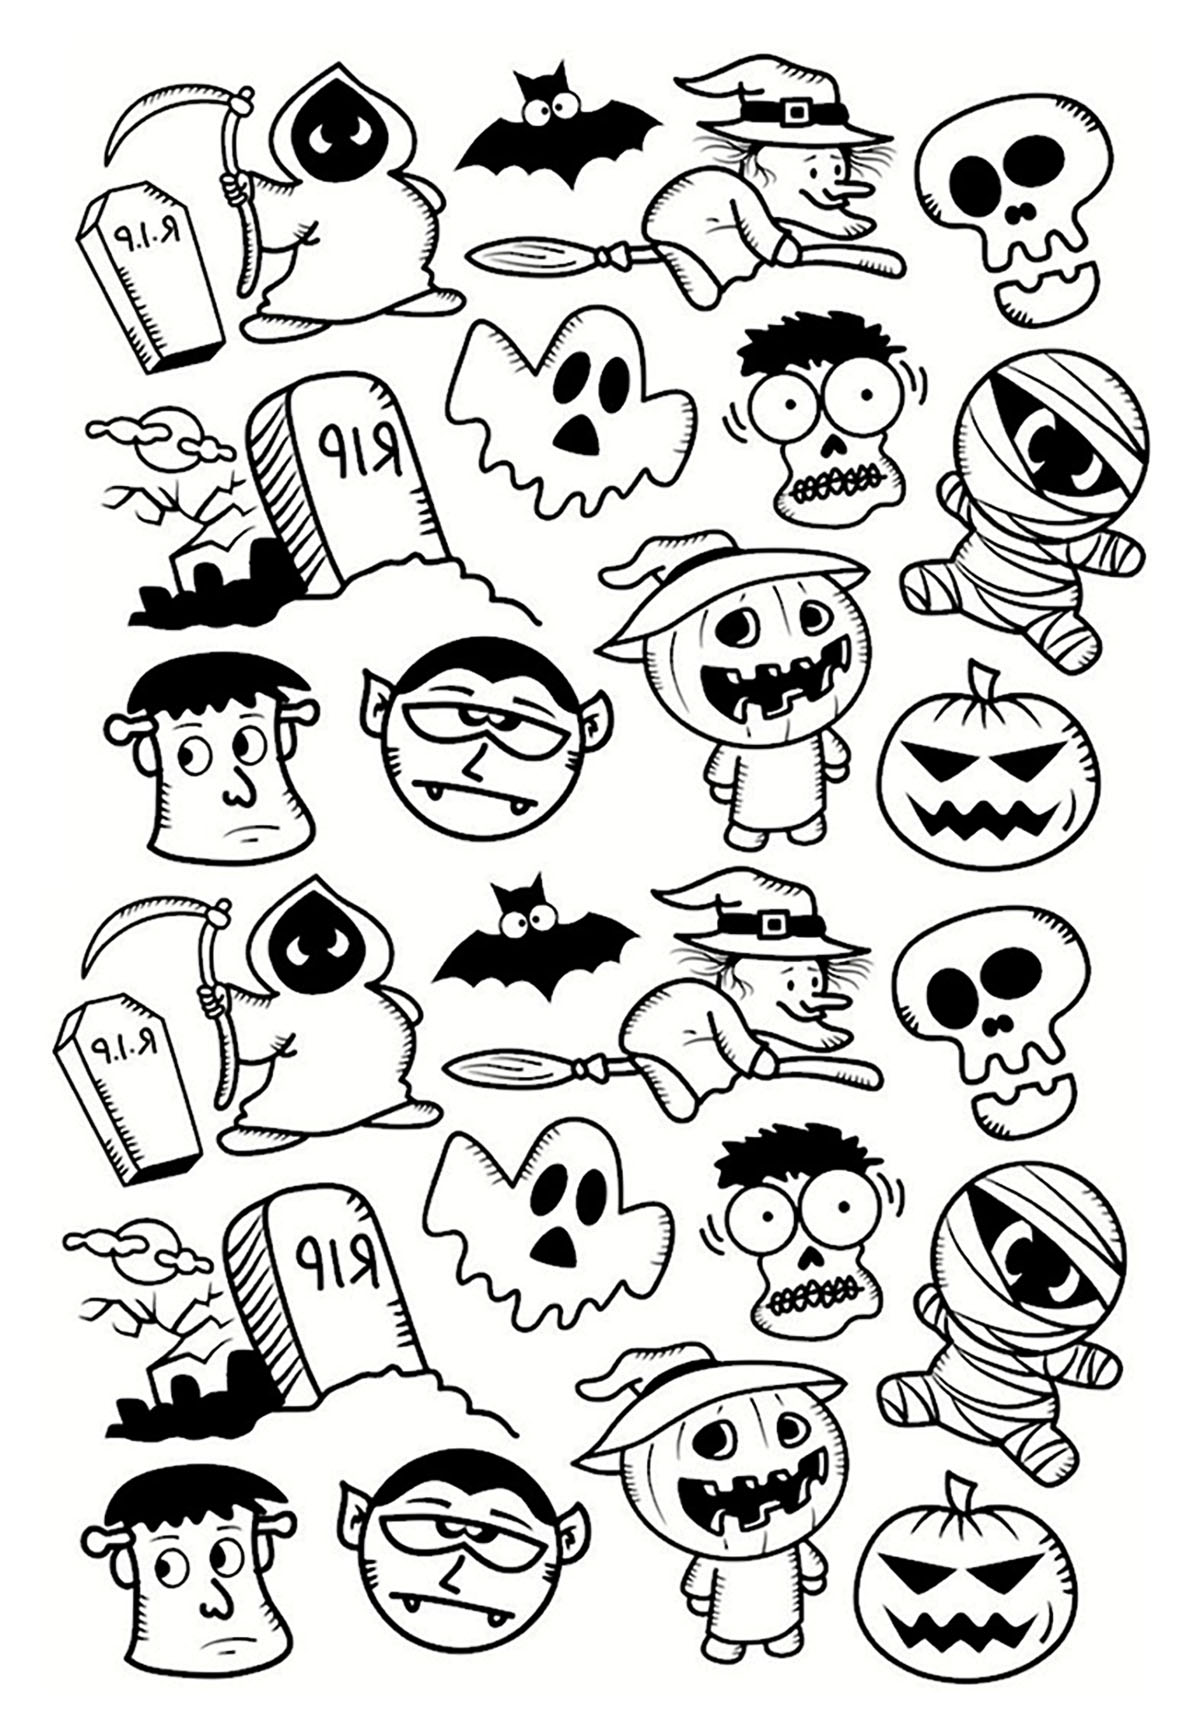 Halloween doodle characters Halloween Adult Coloring Pages